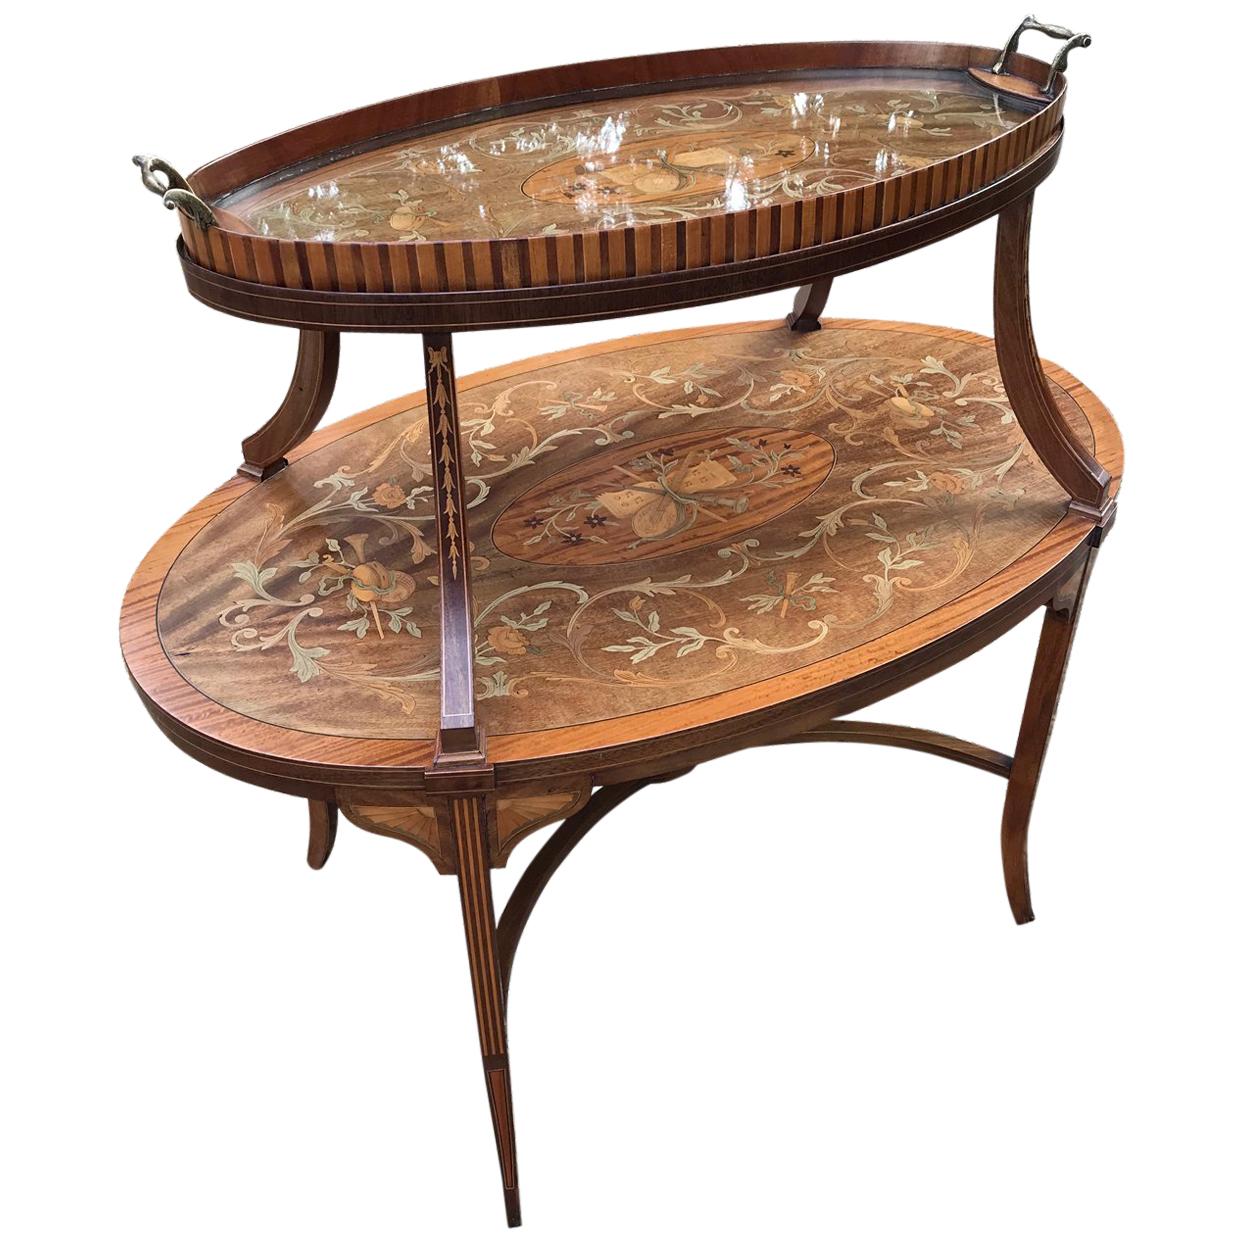 19th Century Mahogany Marquetry Tier Tray Table by S & H Jewell, London im Angebot